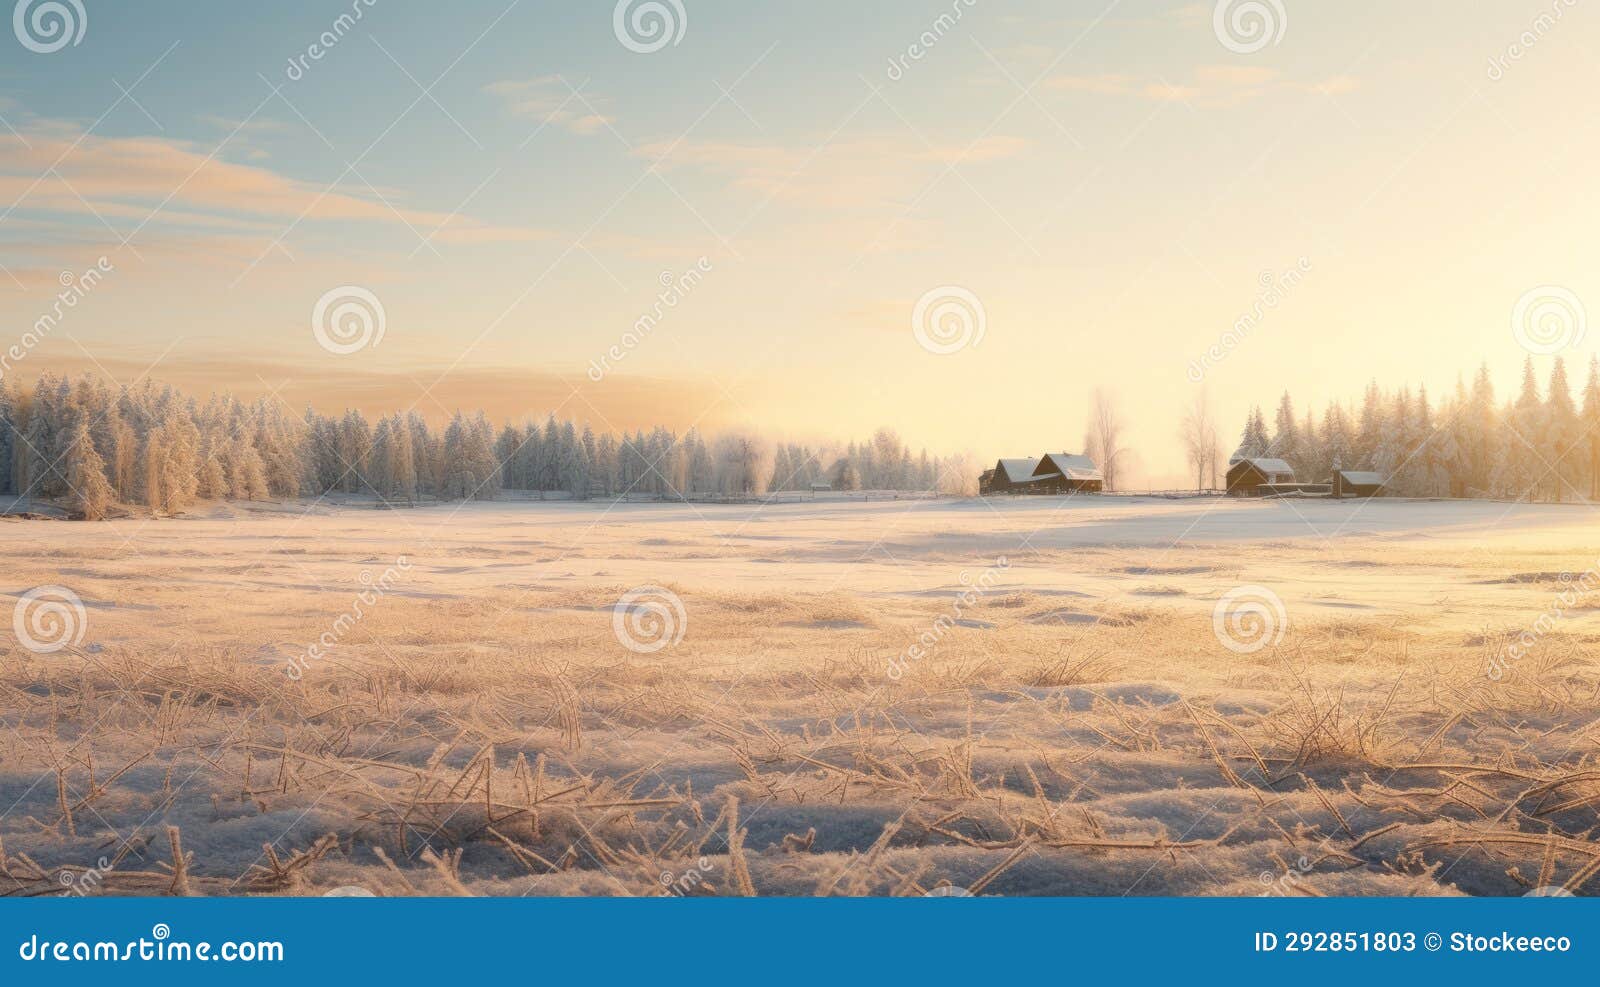 winter wonderland: a scenic view of a snow-covered field in rural finland